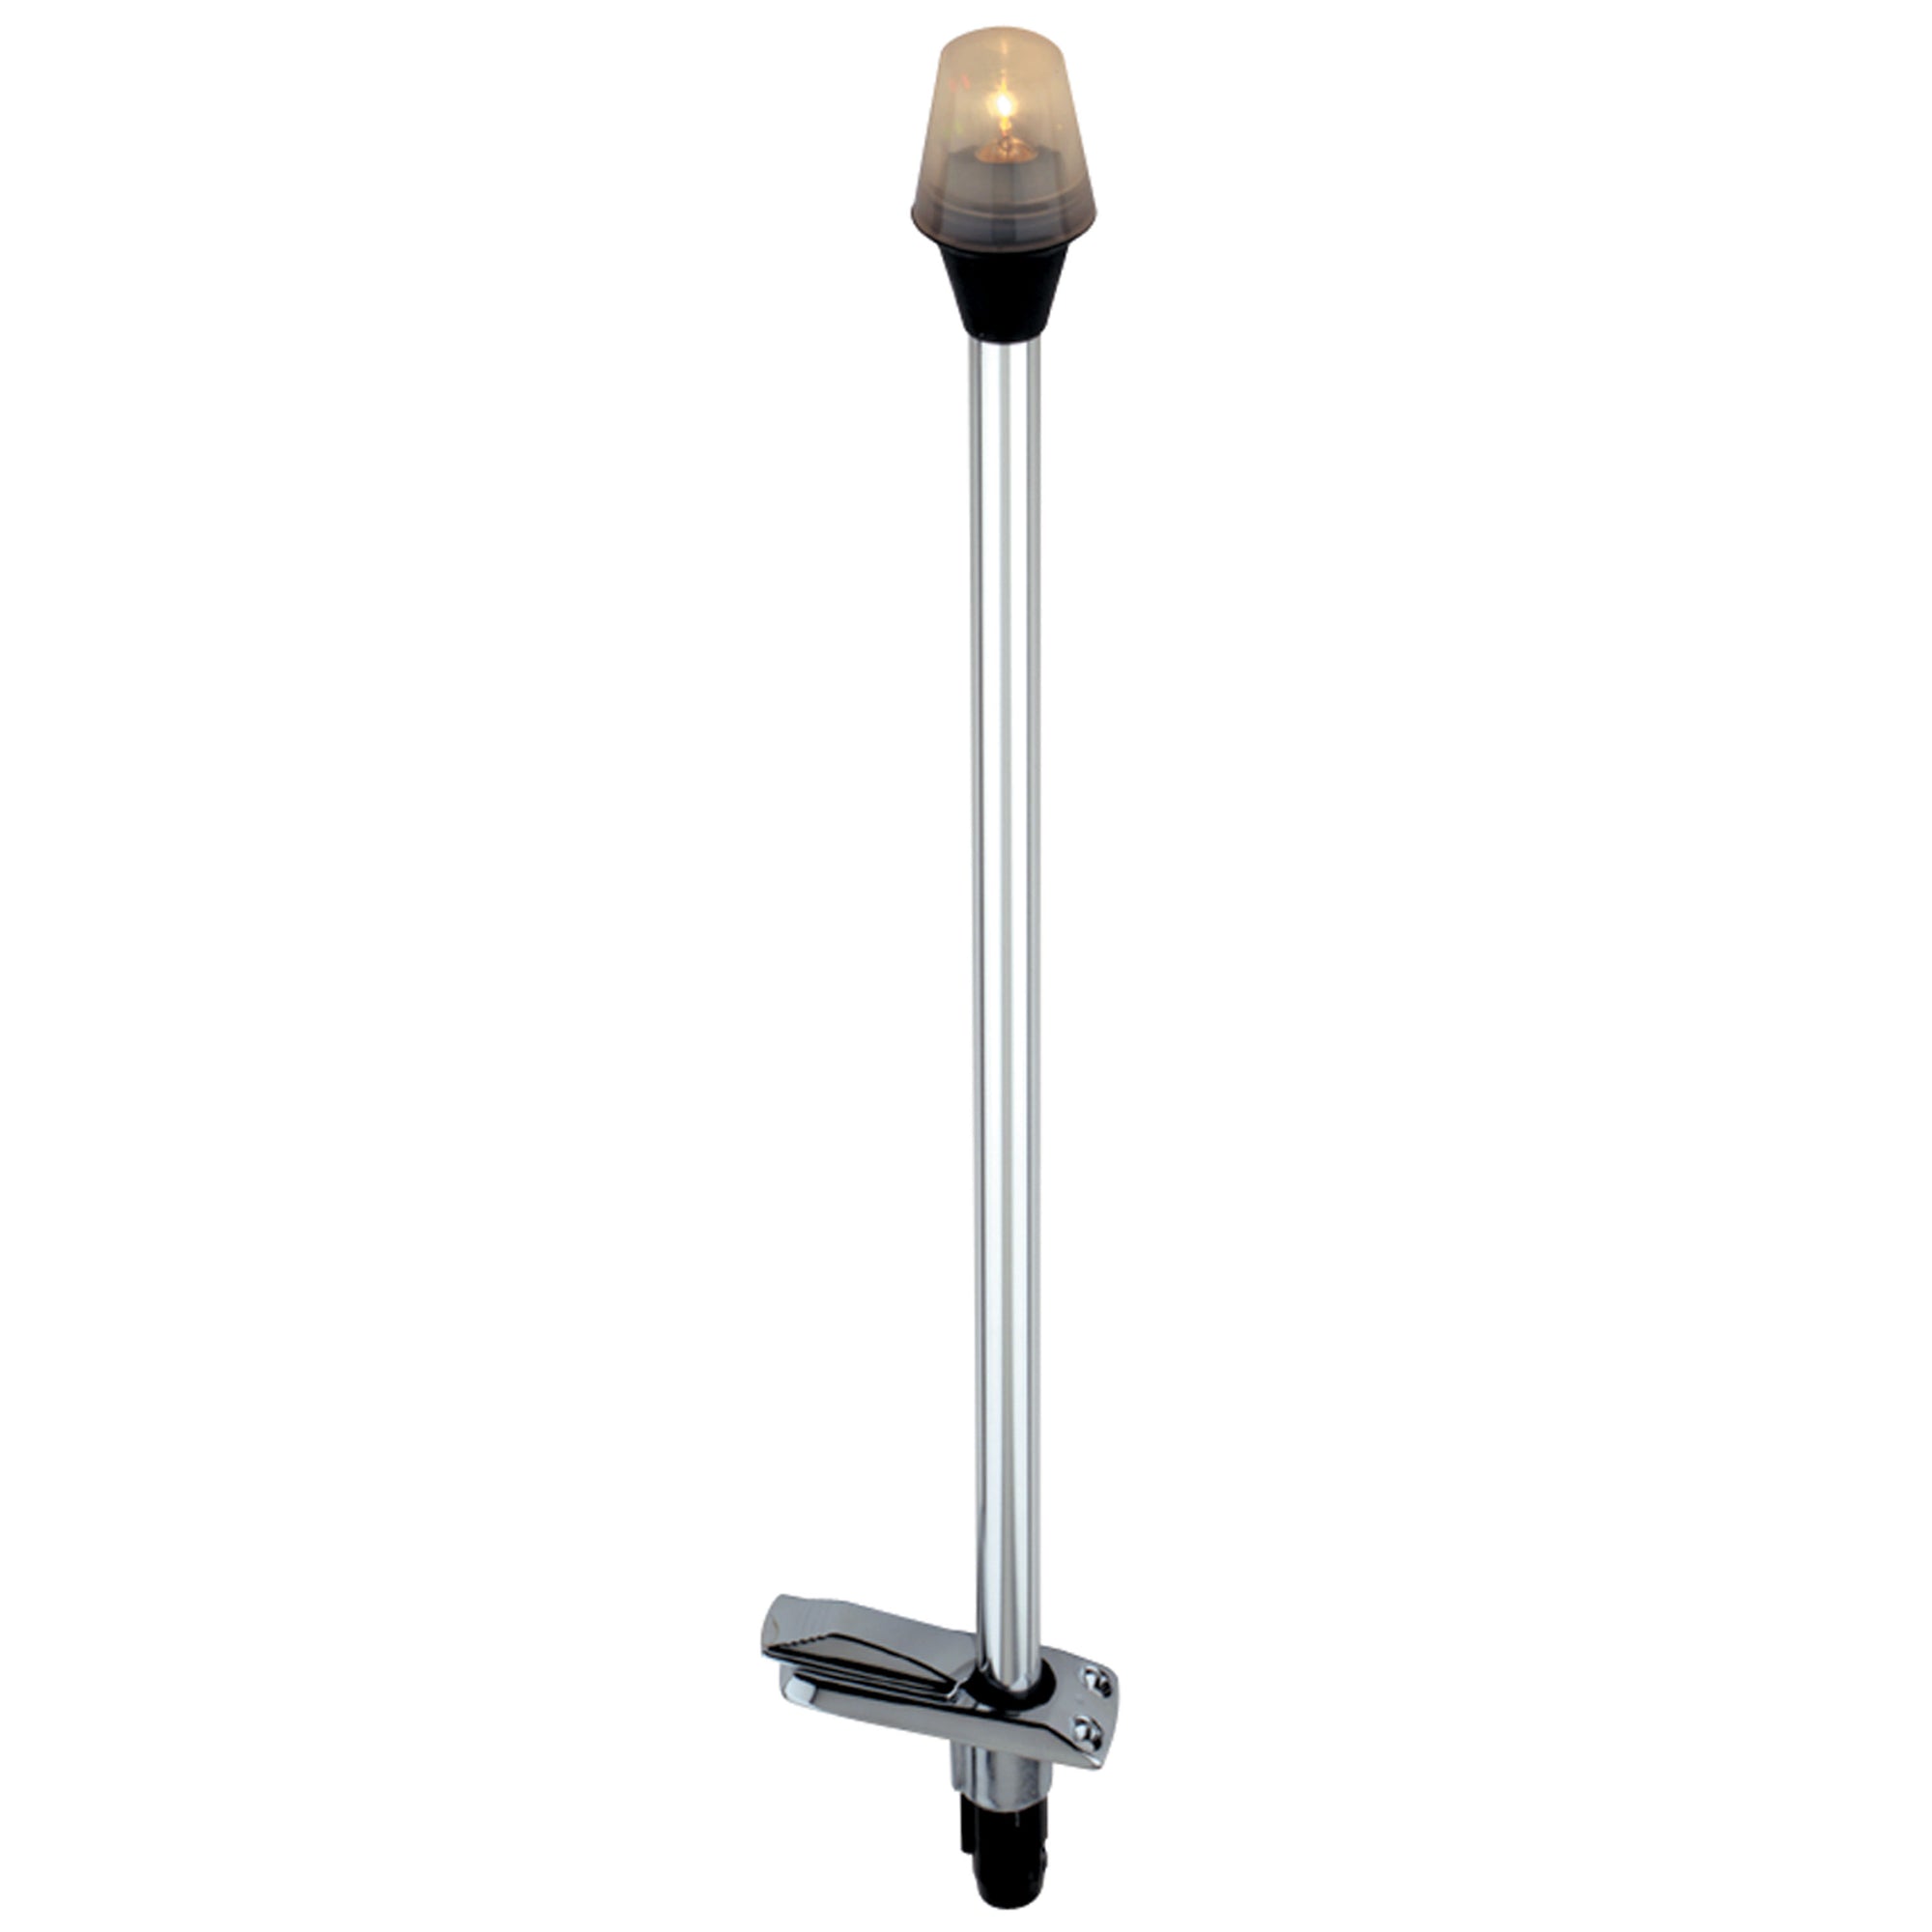 Attwood 7100A7 Stowaway Two-Mile Pole Light with Plug-In Base - 24 in.